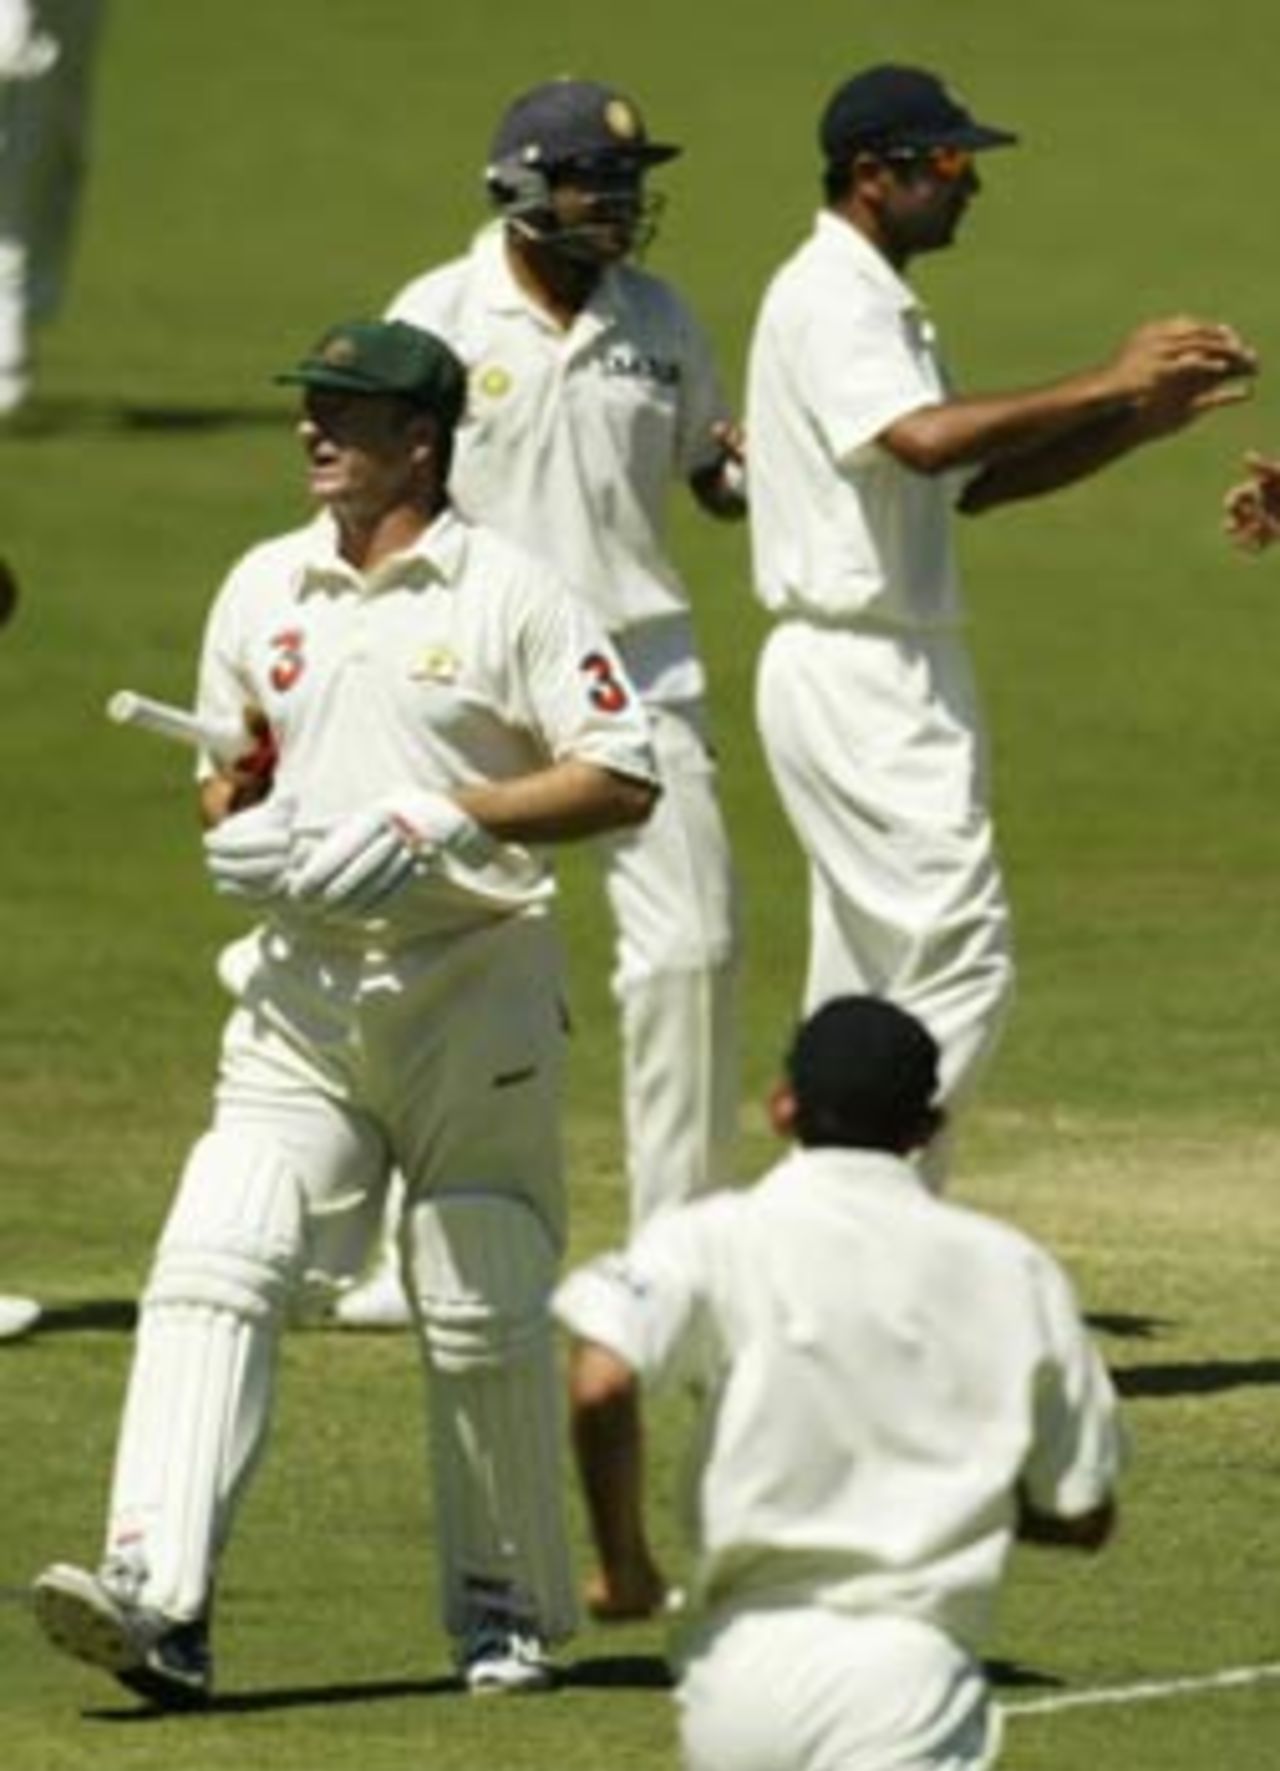 All India celebrated when Waugh was dismissed, Australia v India, 2nd Test, Adelaide, 4th day, December 15, 2003